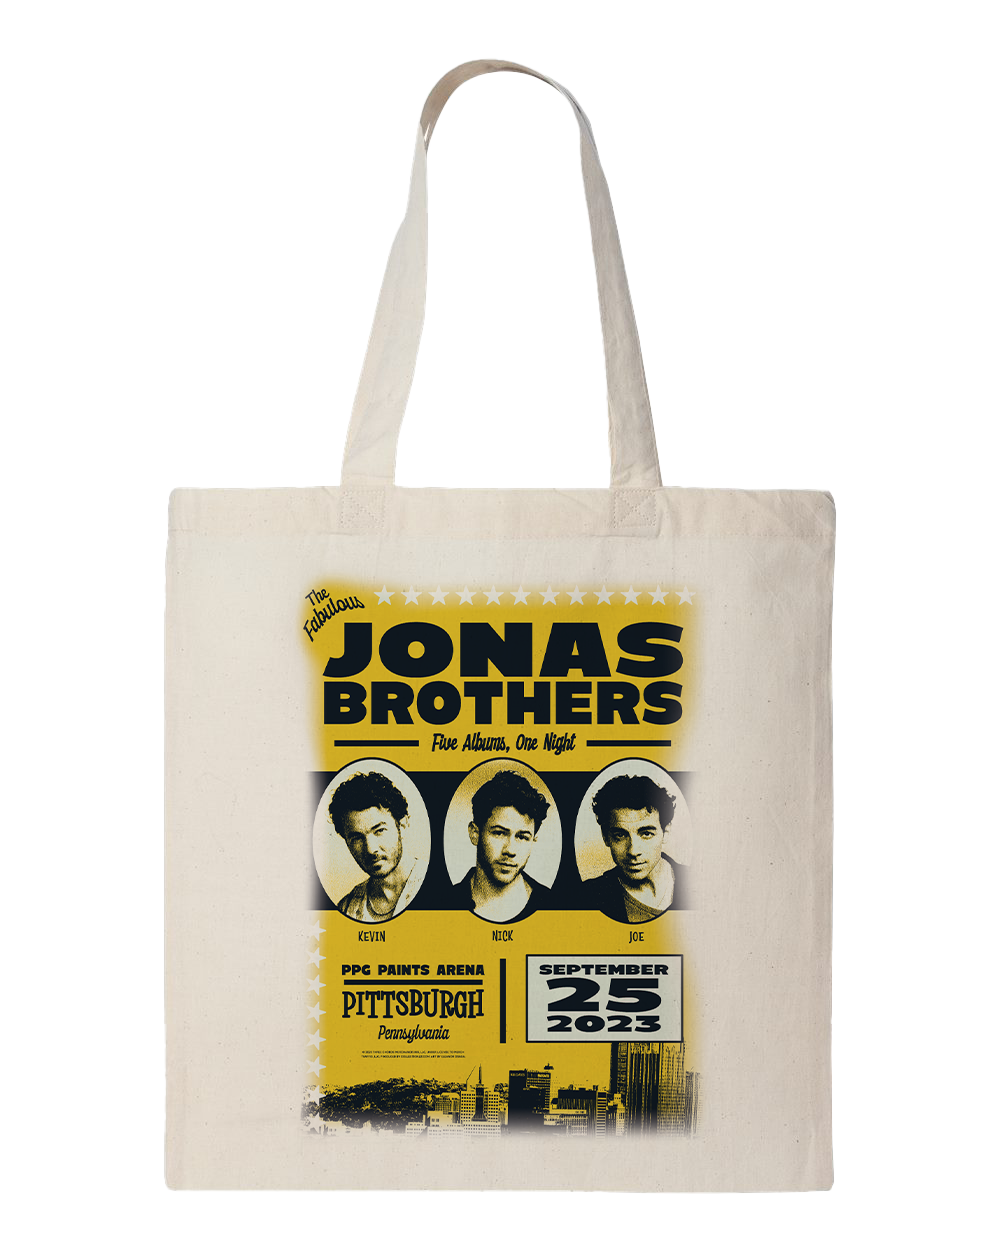 PITTSBURGH TOTE